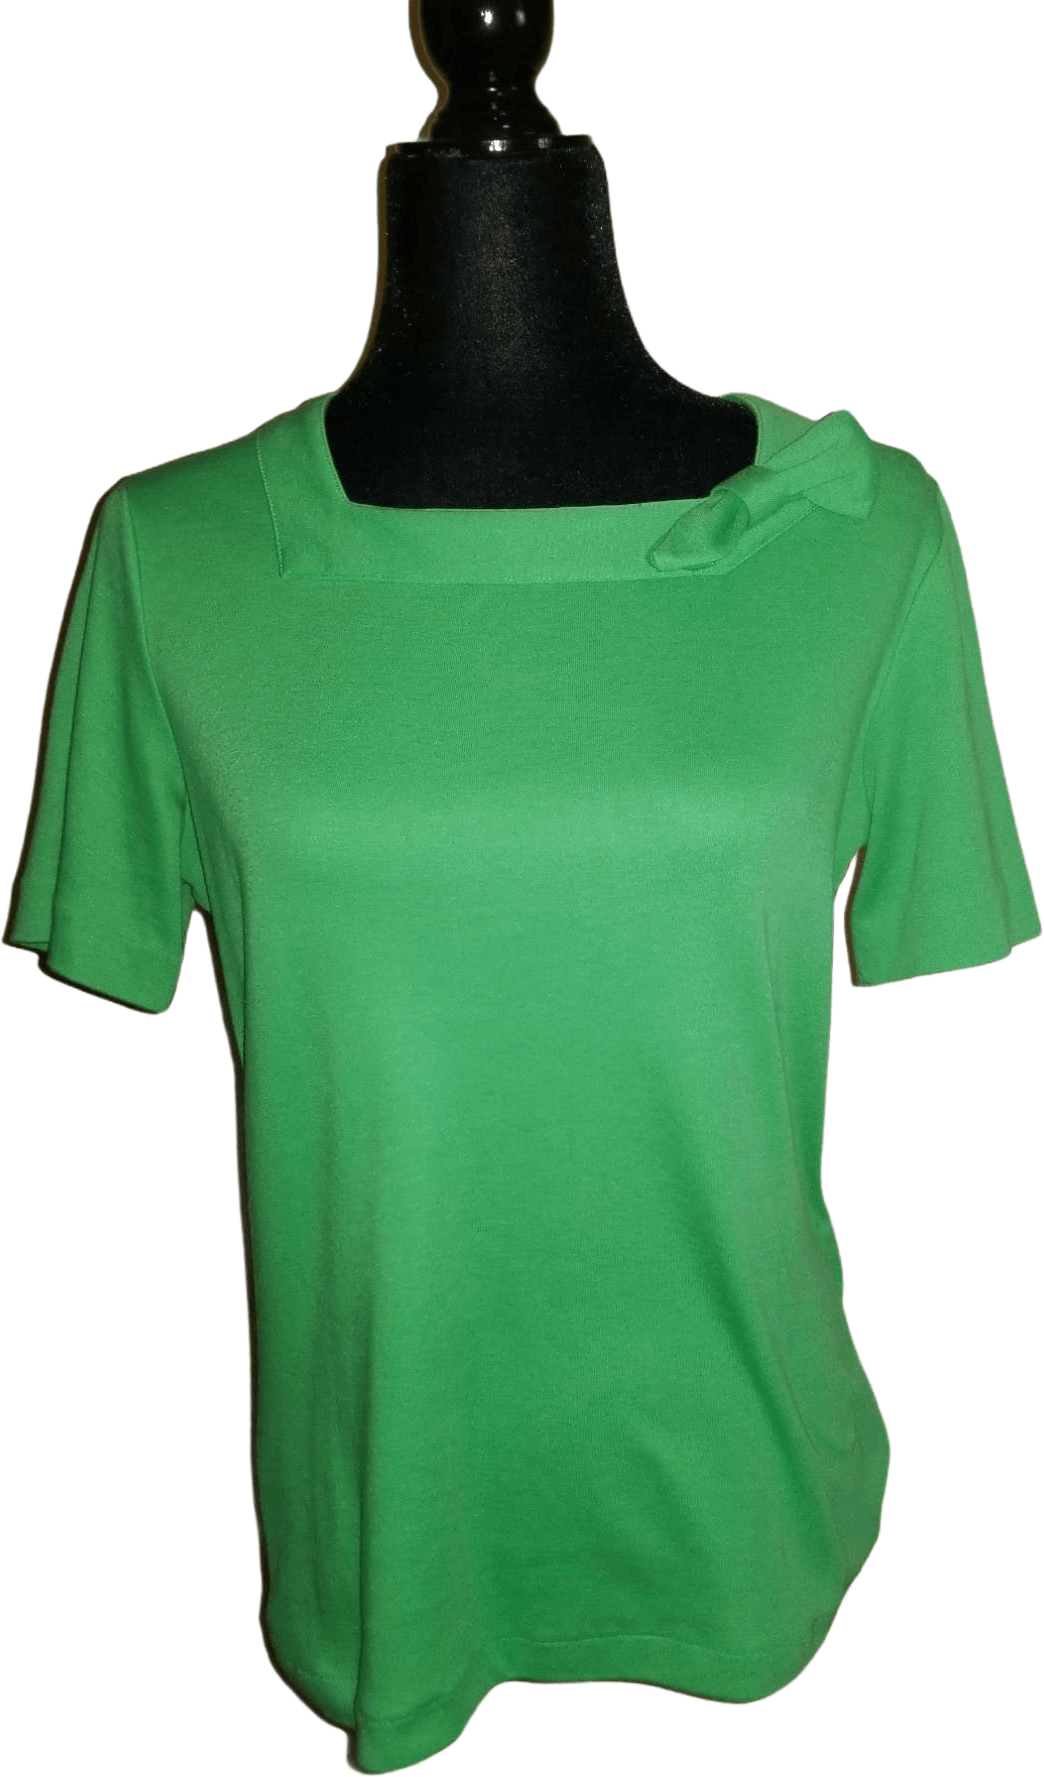 80's Kelly Green Short Sleeve Knit Top with Bow Detail by Sanibel Sport